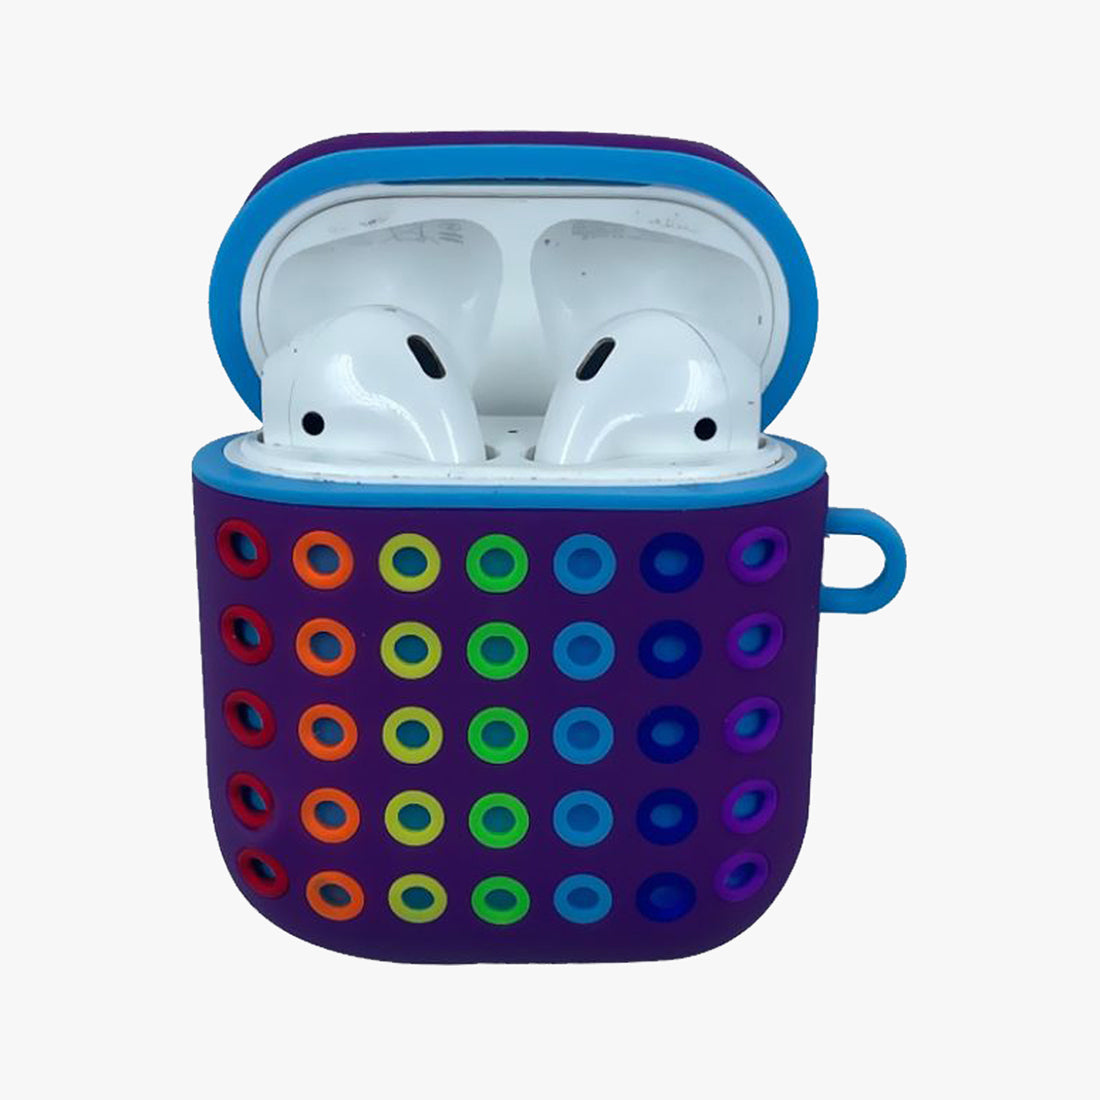 Sport Rainbow Case for AirPods